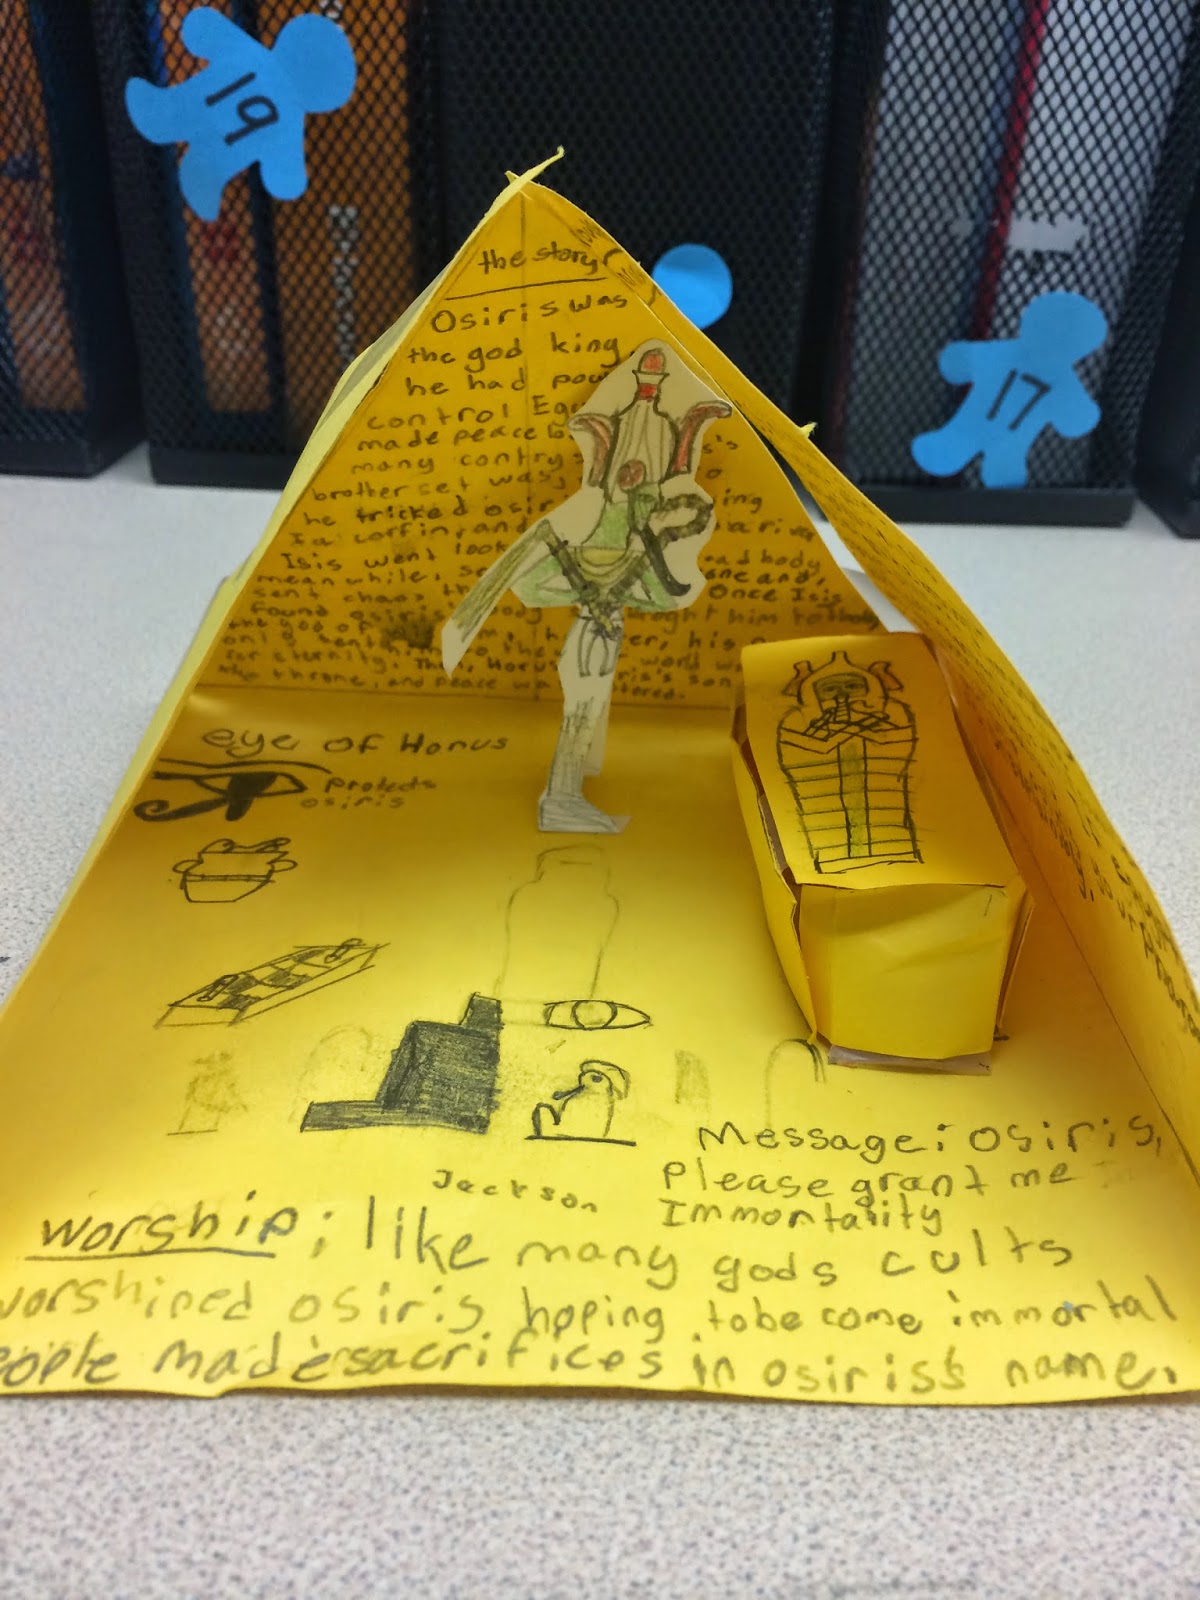 Ms. Spinrod's Class: Ancient Egypt